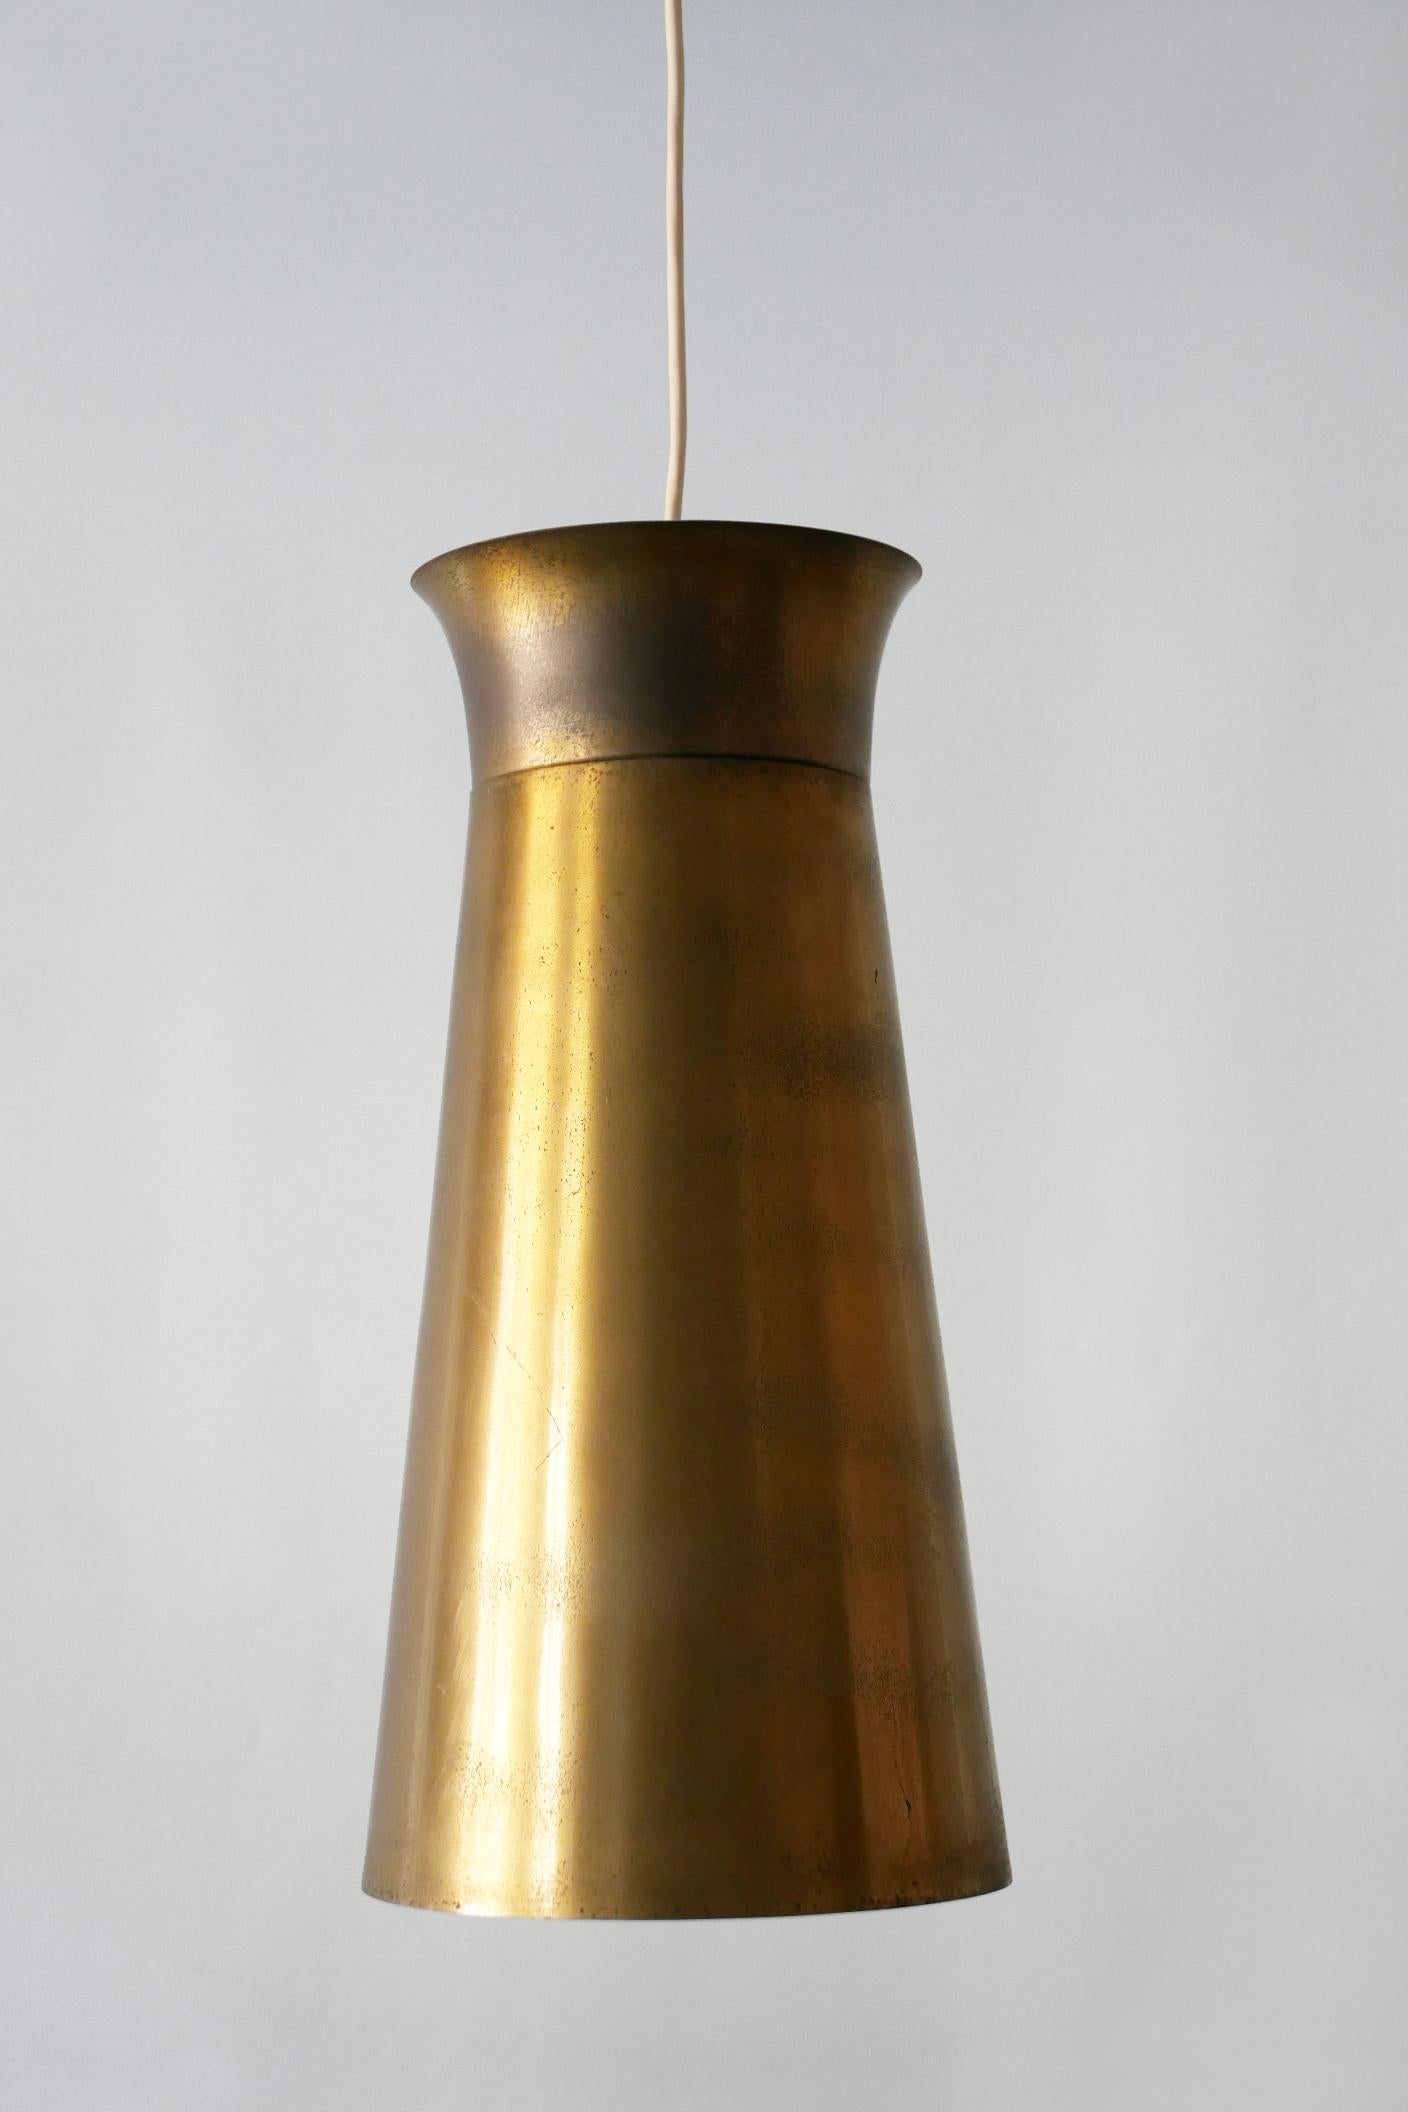 Elegant Mid-Century Modern Brass Pendant Lamps or Hanging Lights, 1950s, Germany For Sale 7